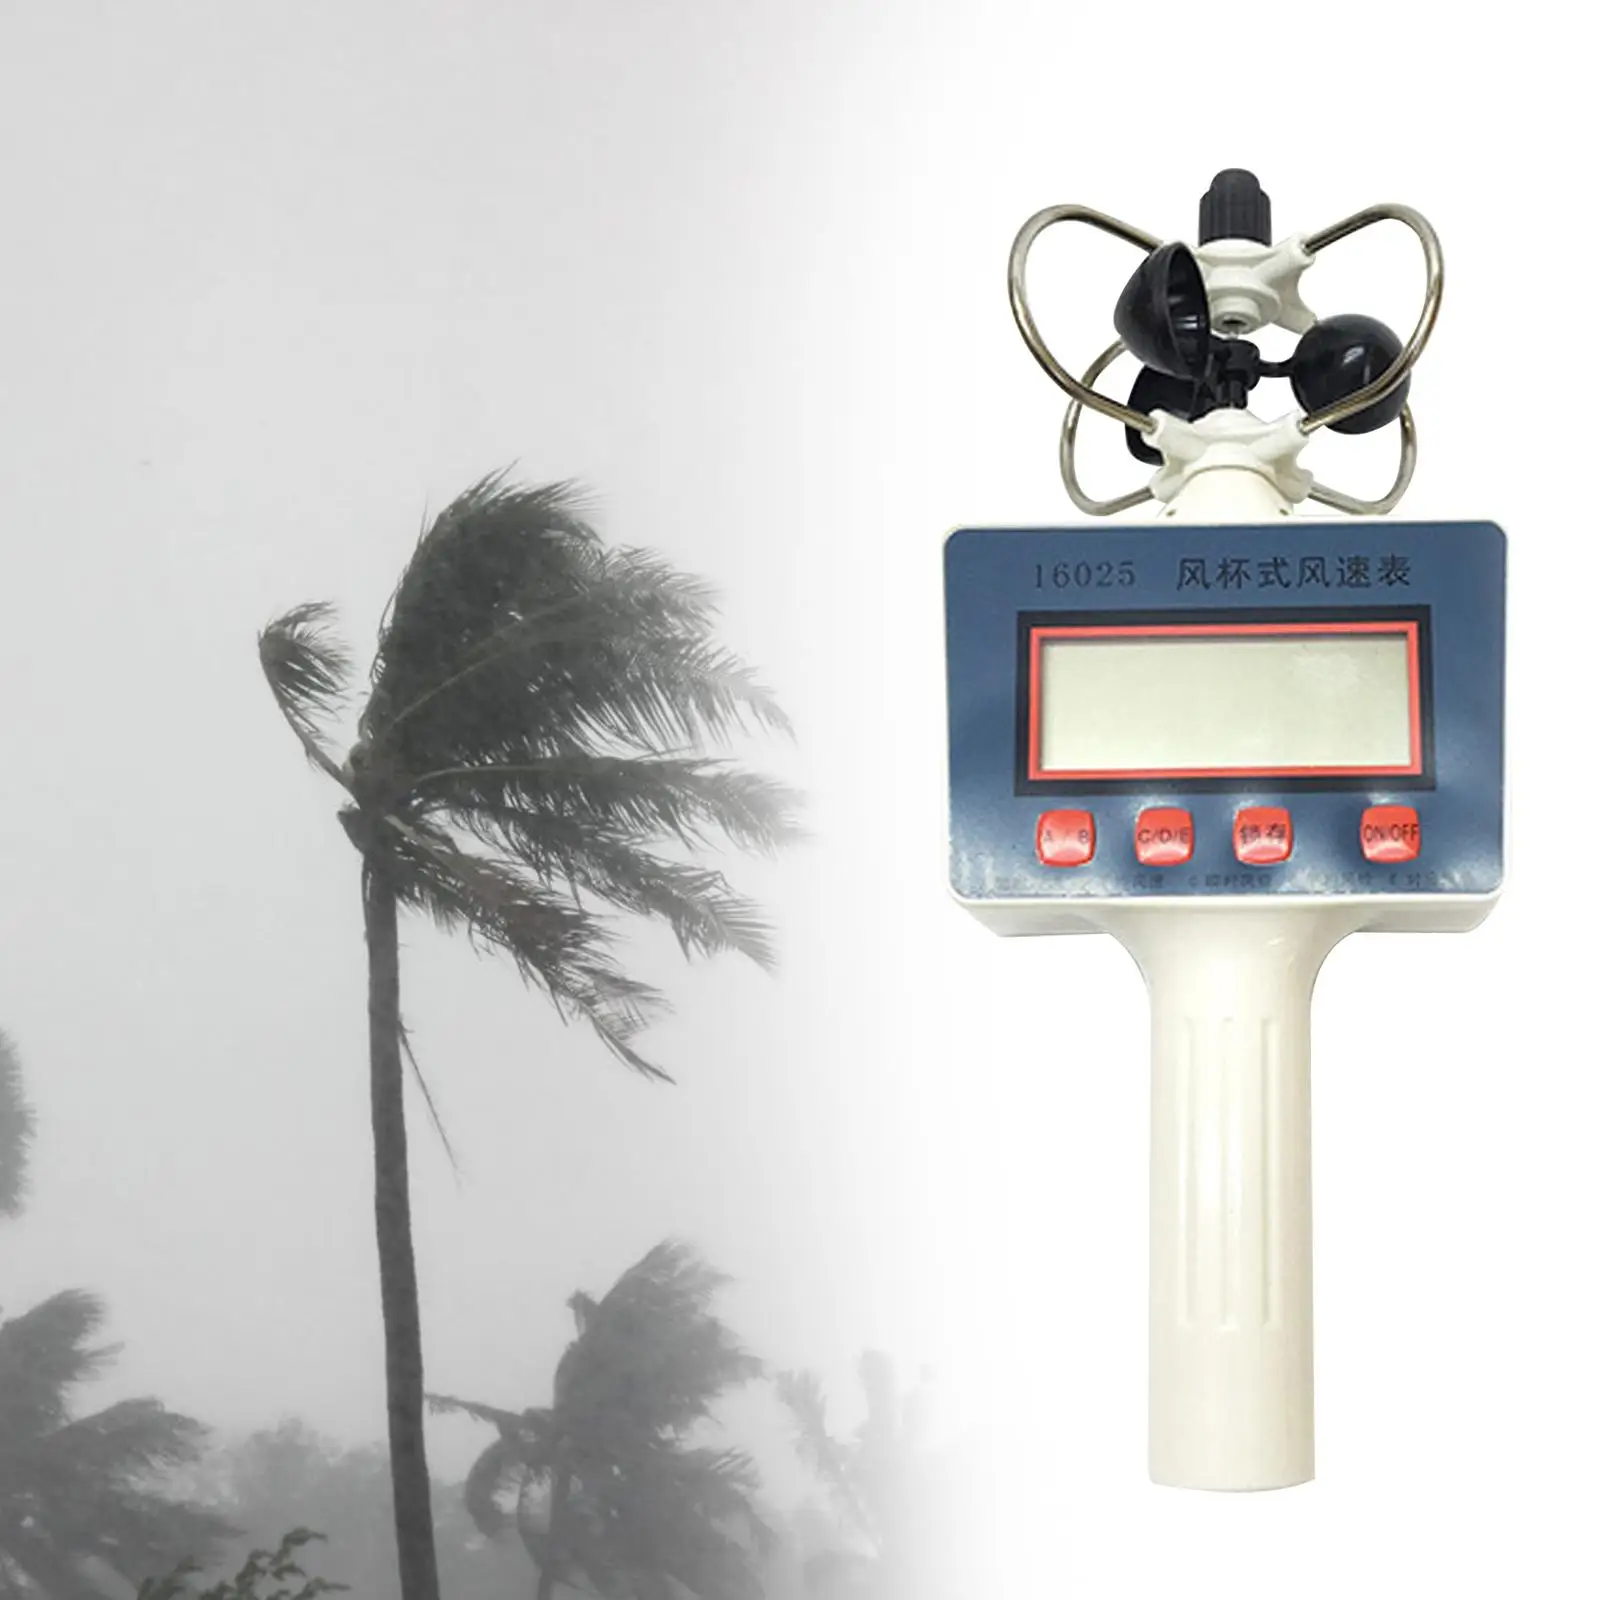 Cup Anemometer Accurate Portable Wind Gauges Tool Handheld Anemometer for Outdoor Sailing Dust Collection System Surfing Hunting